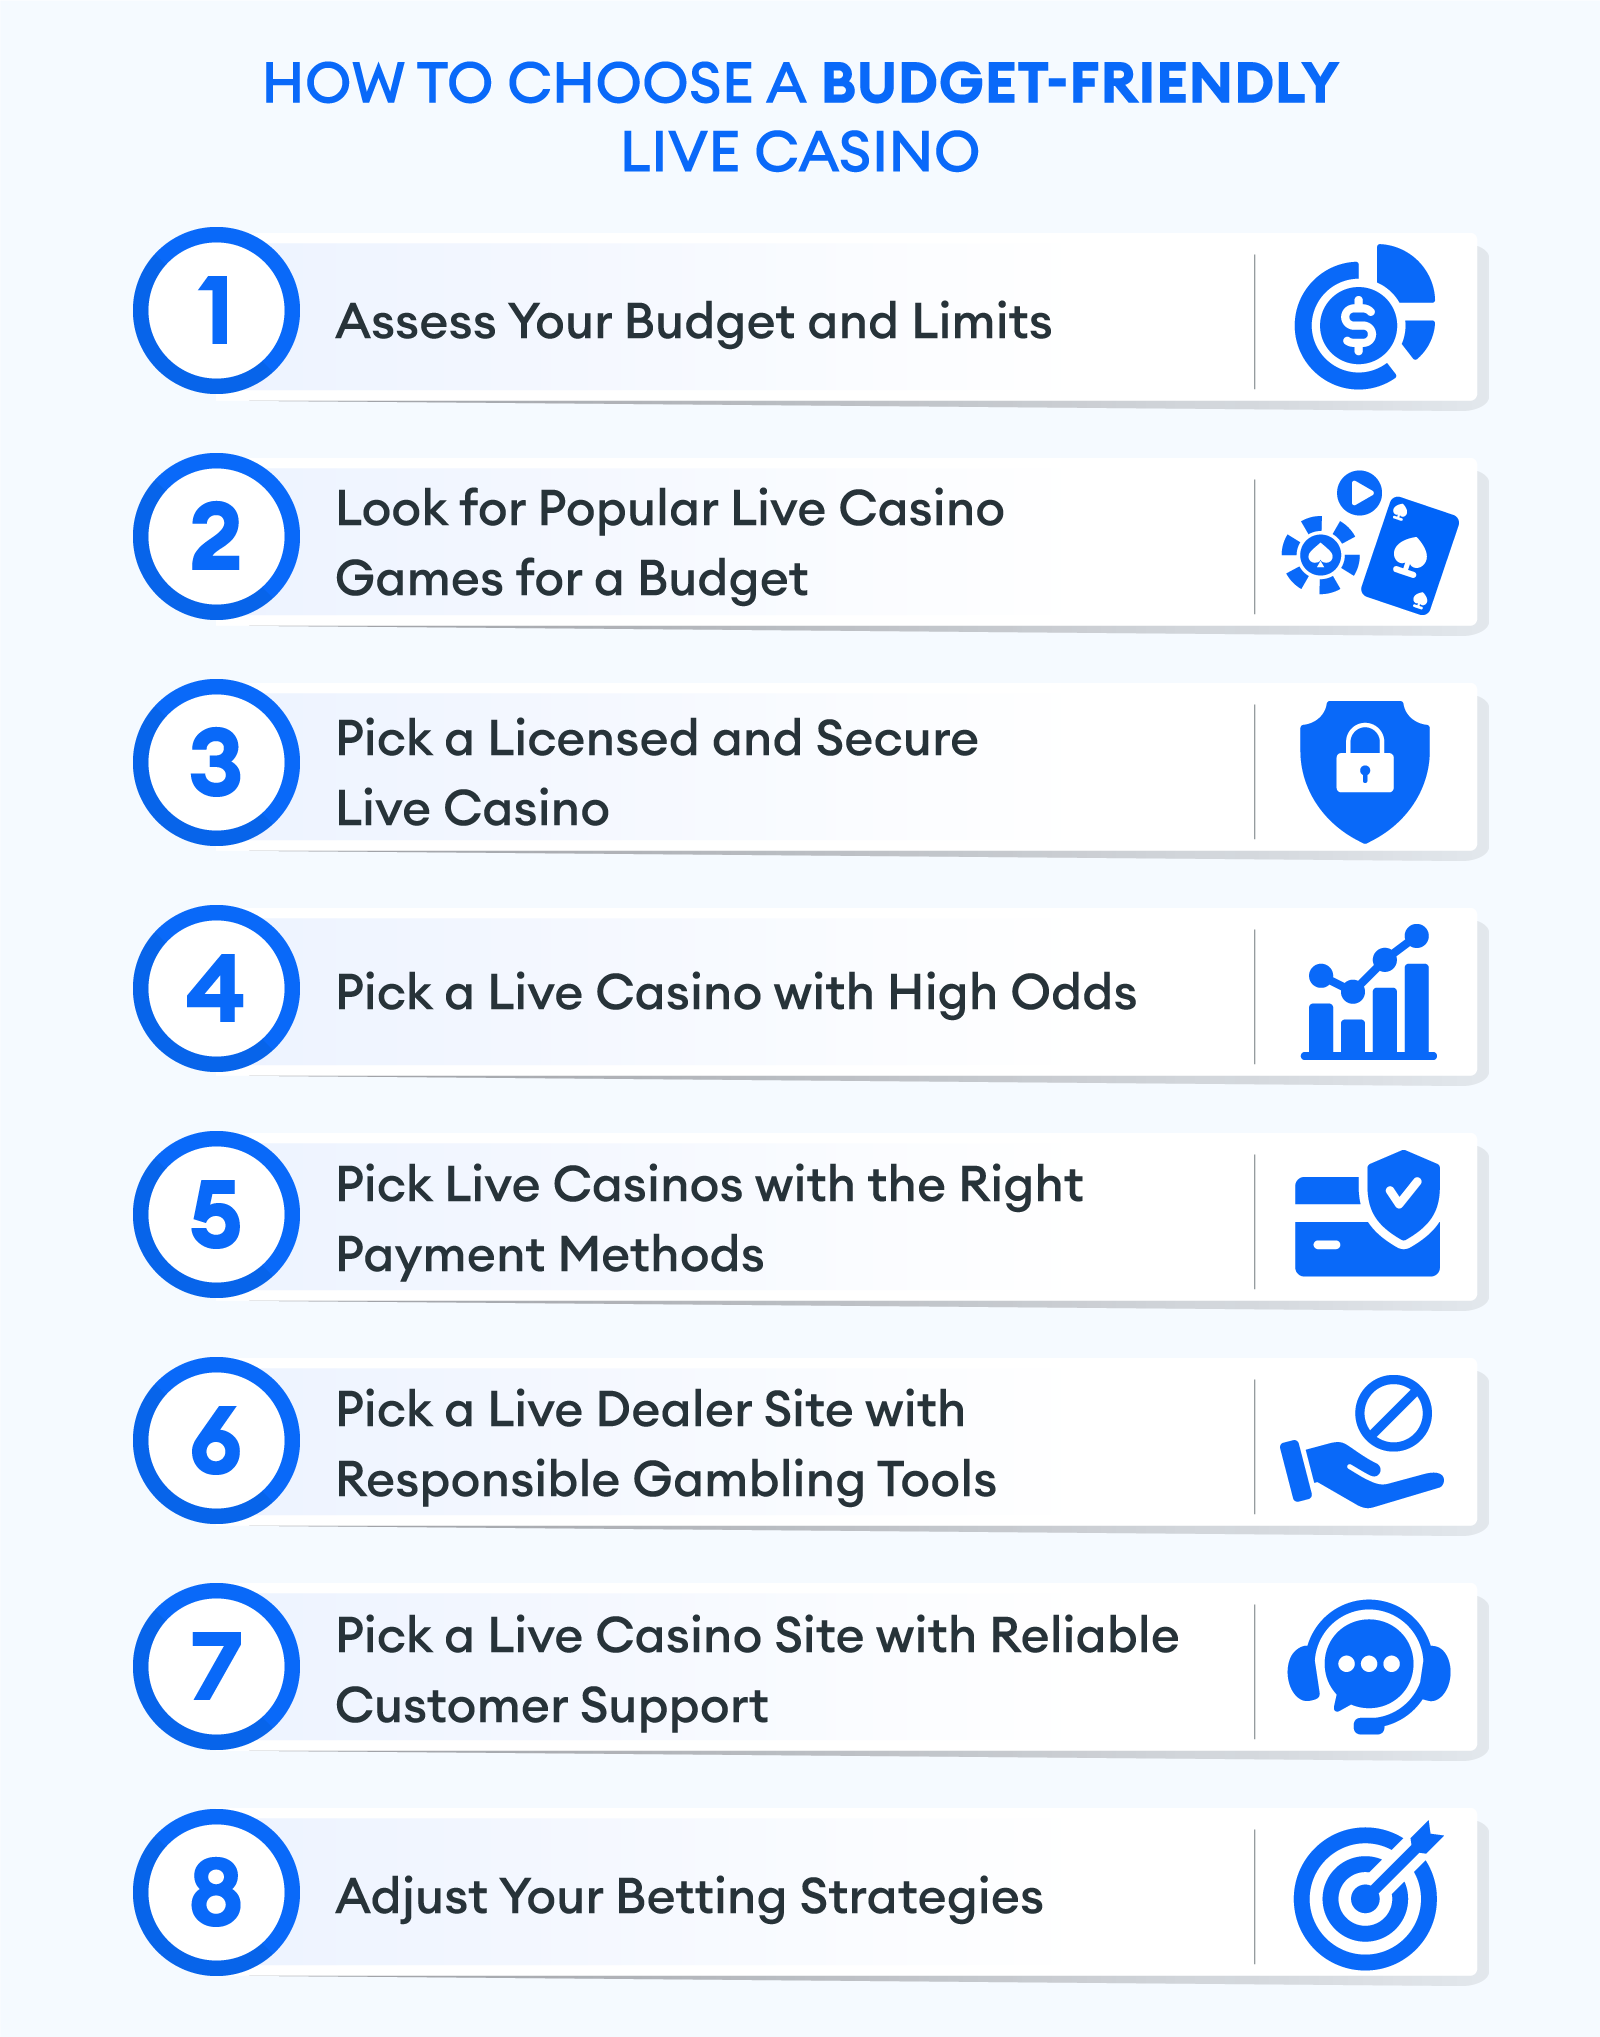 How to Choose a Budget-Friendly Live Casino in 8 steps